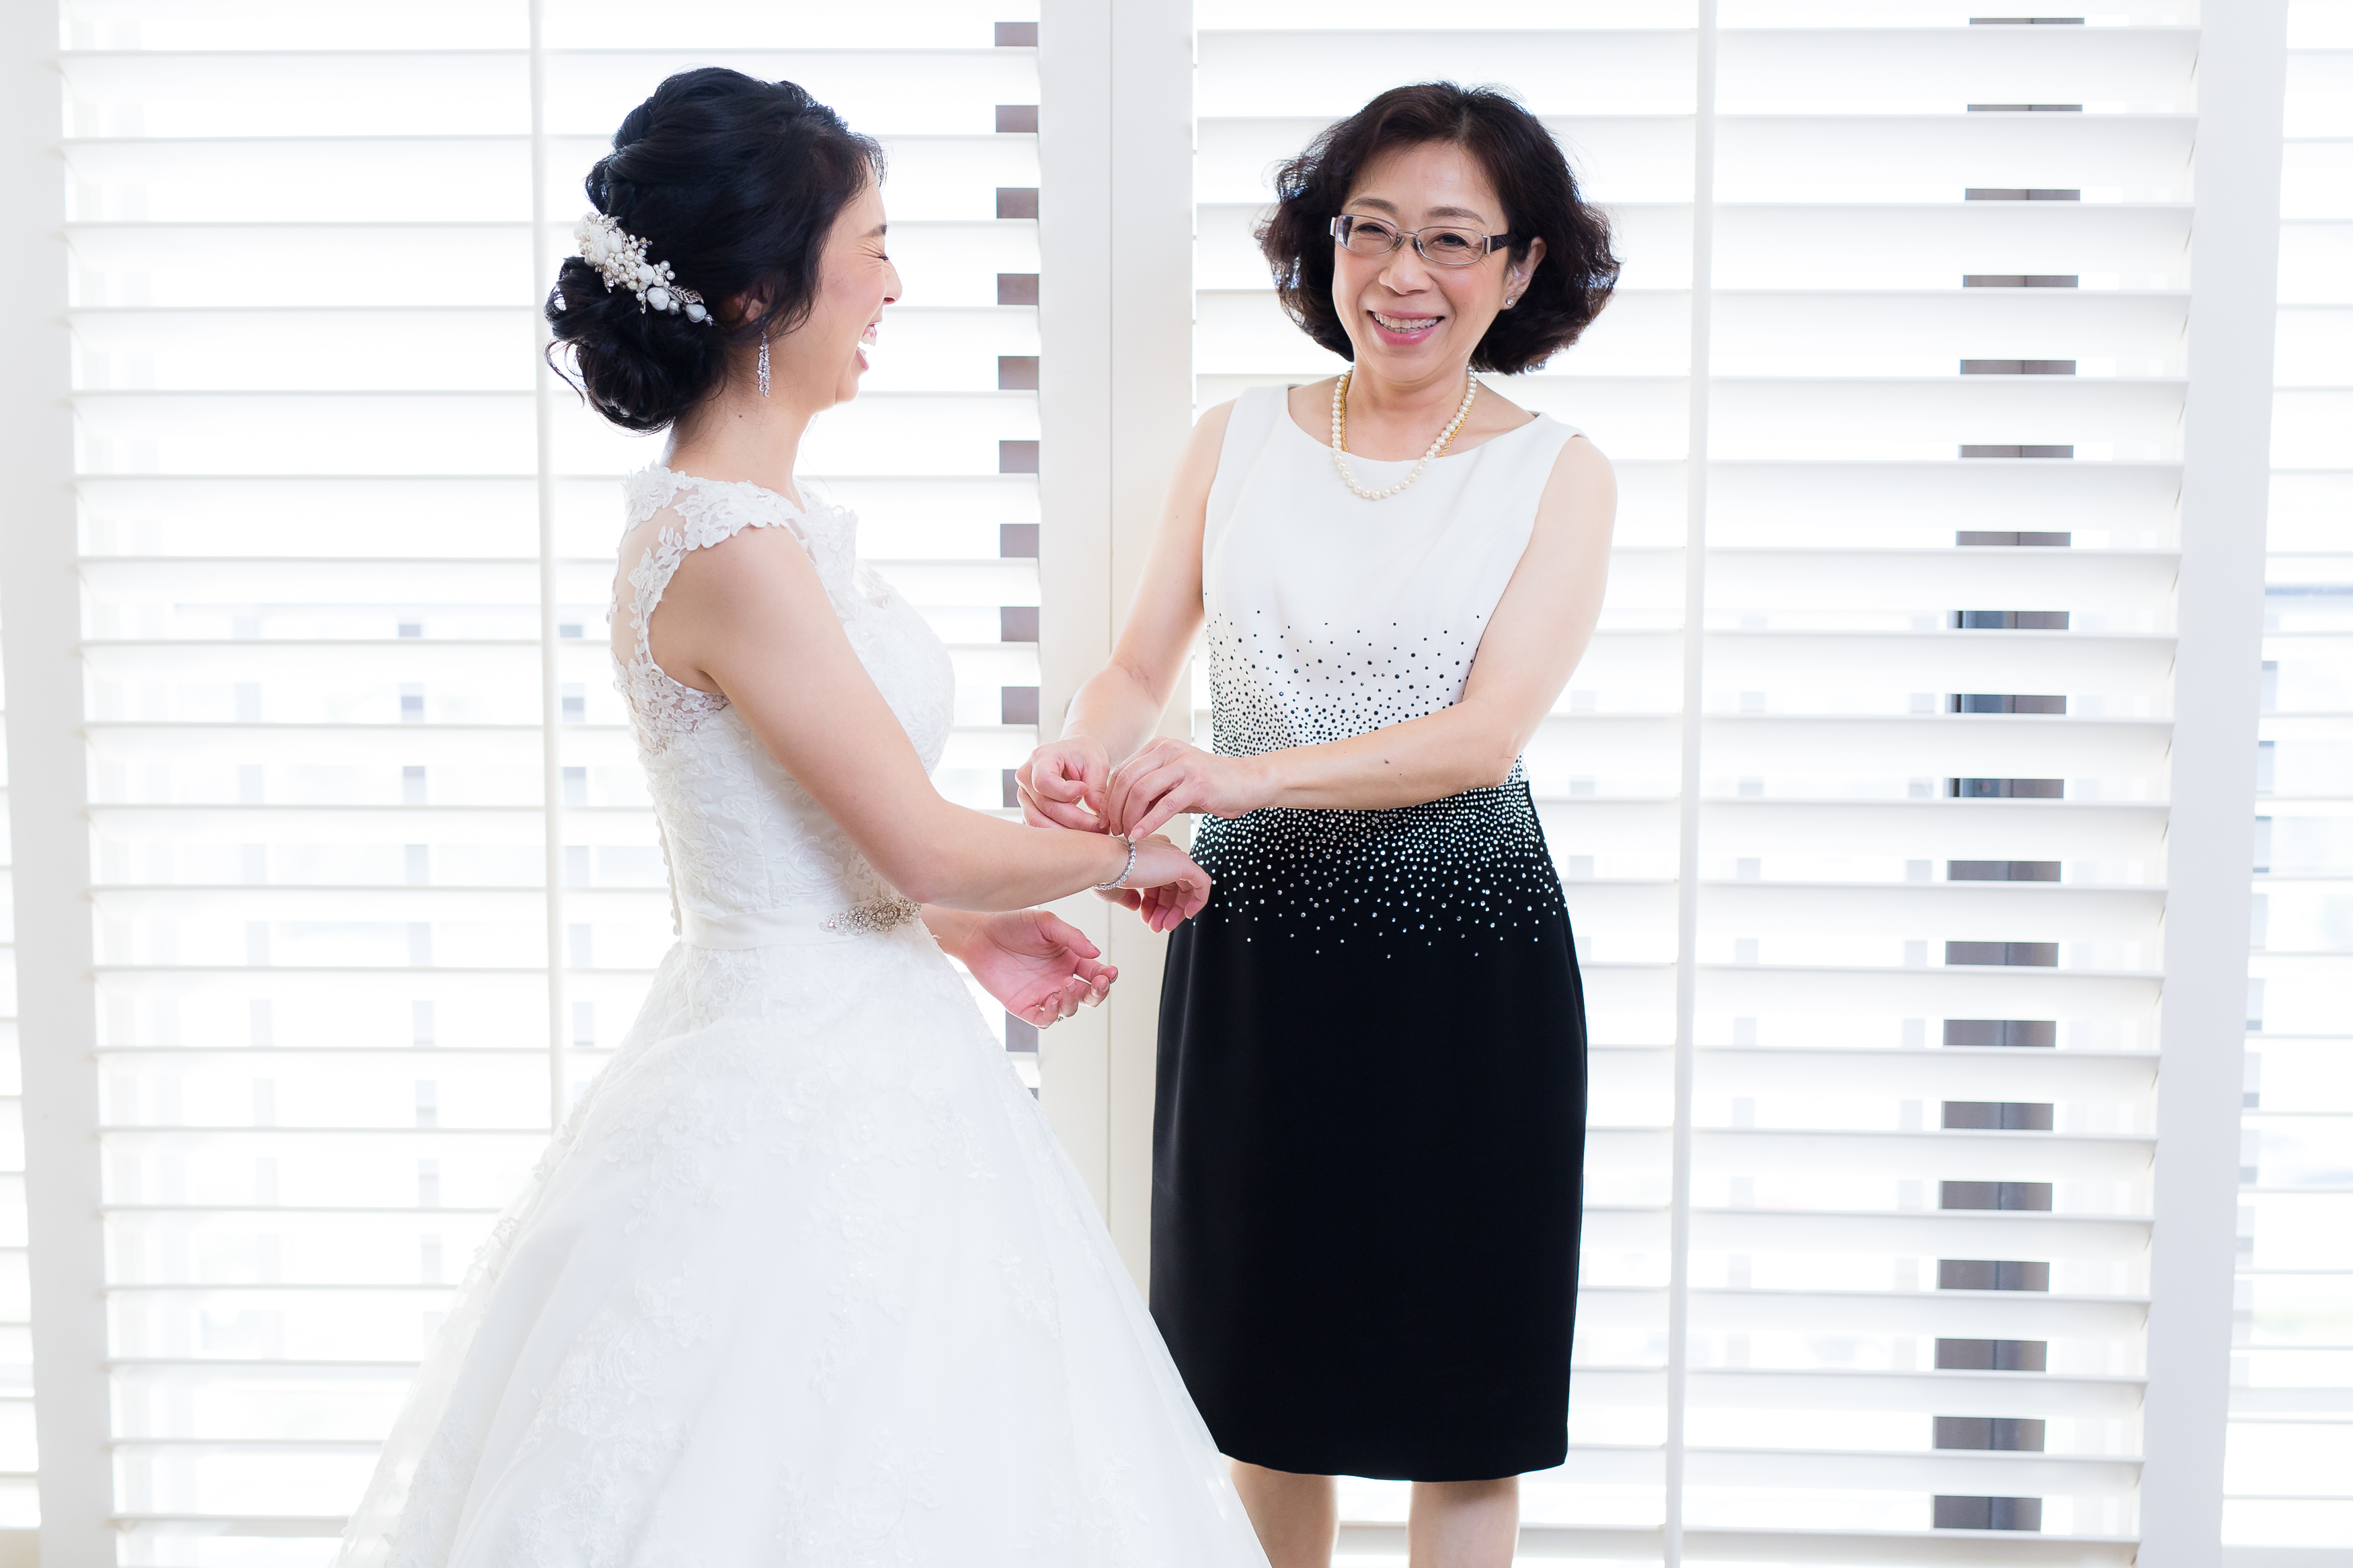 Mom helping bride put on bracelet while laughing